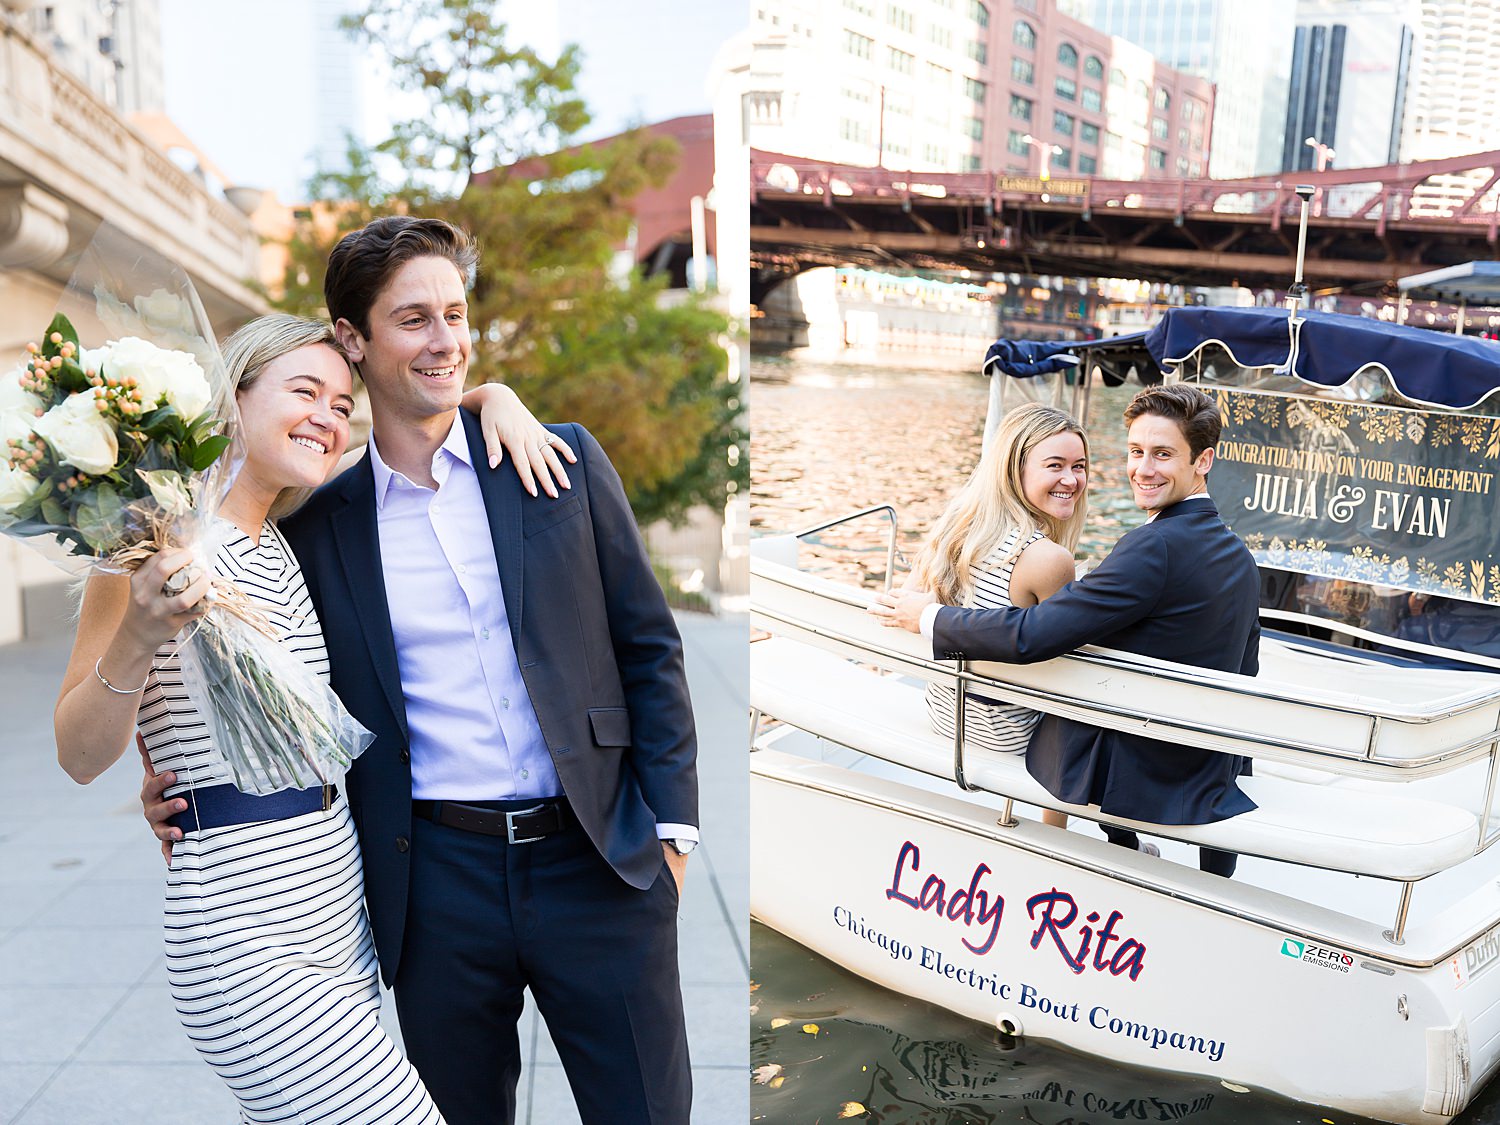 Wedding proposal captured by Chicago proposal photographers.